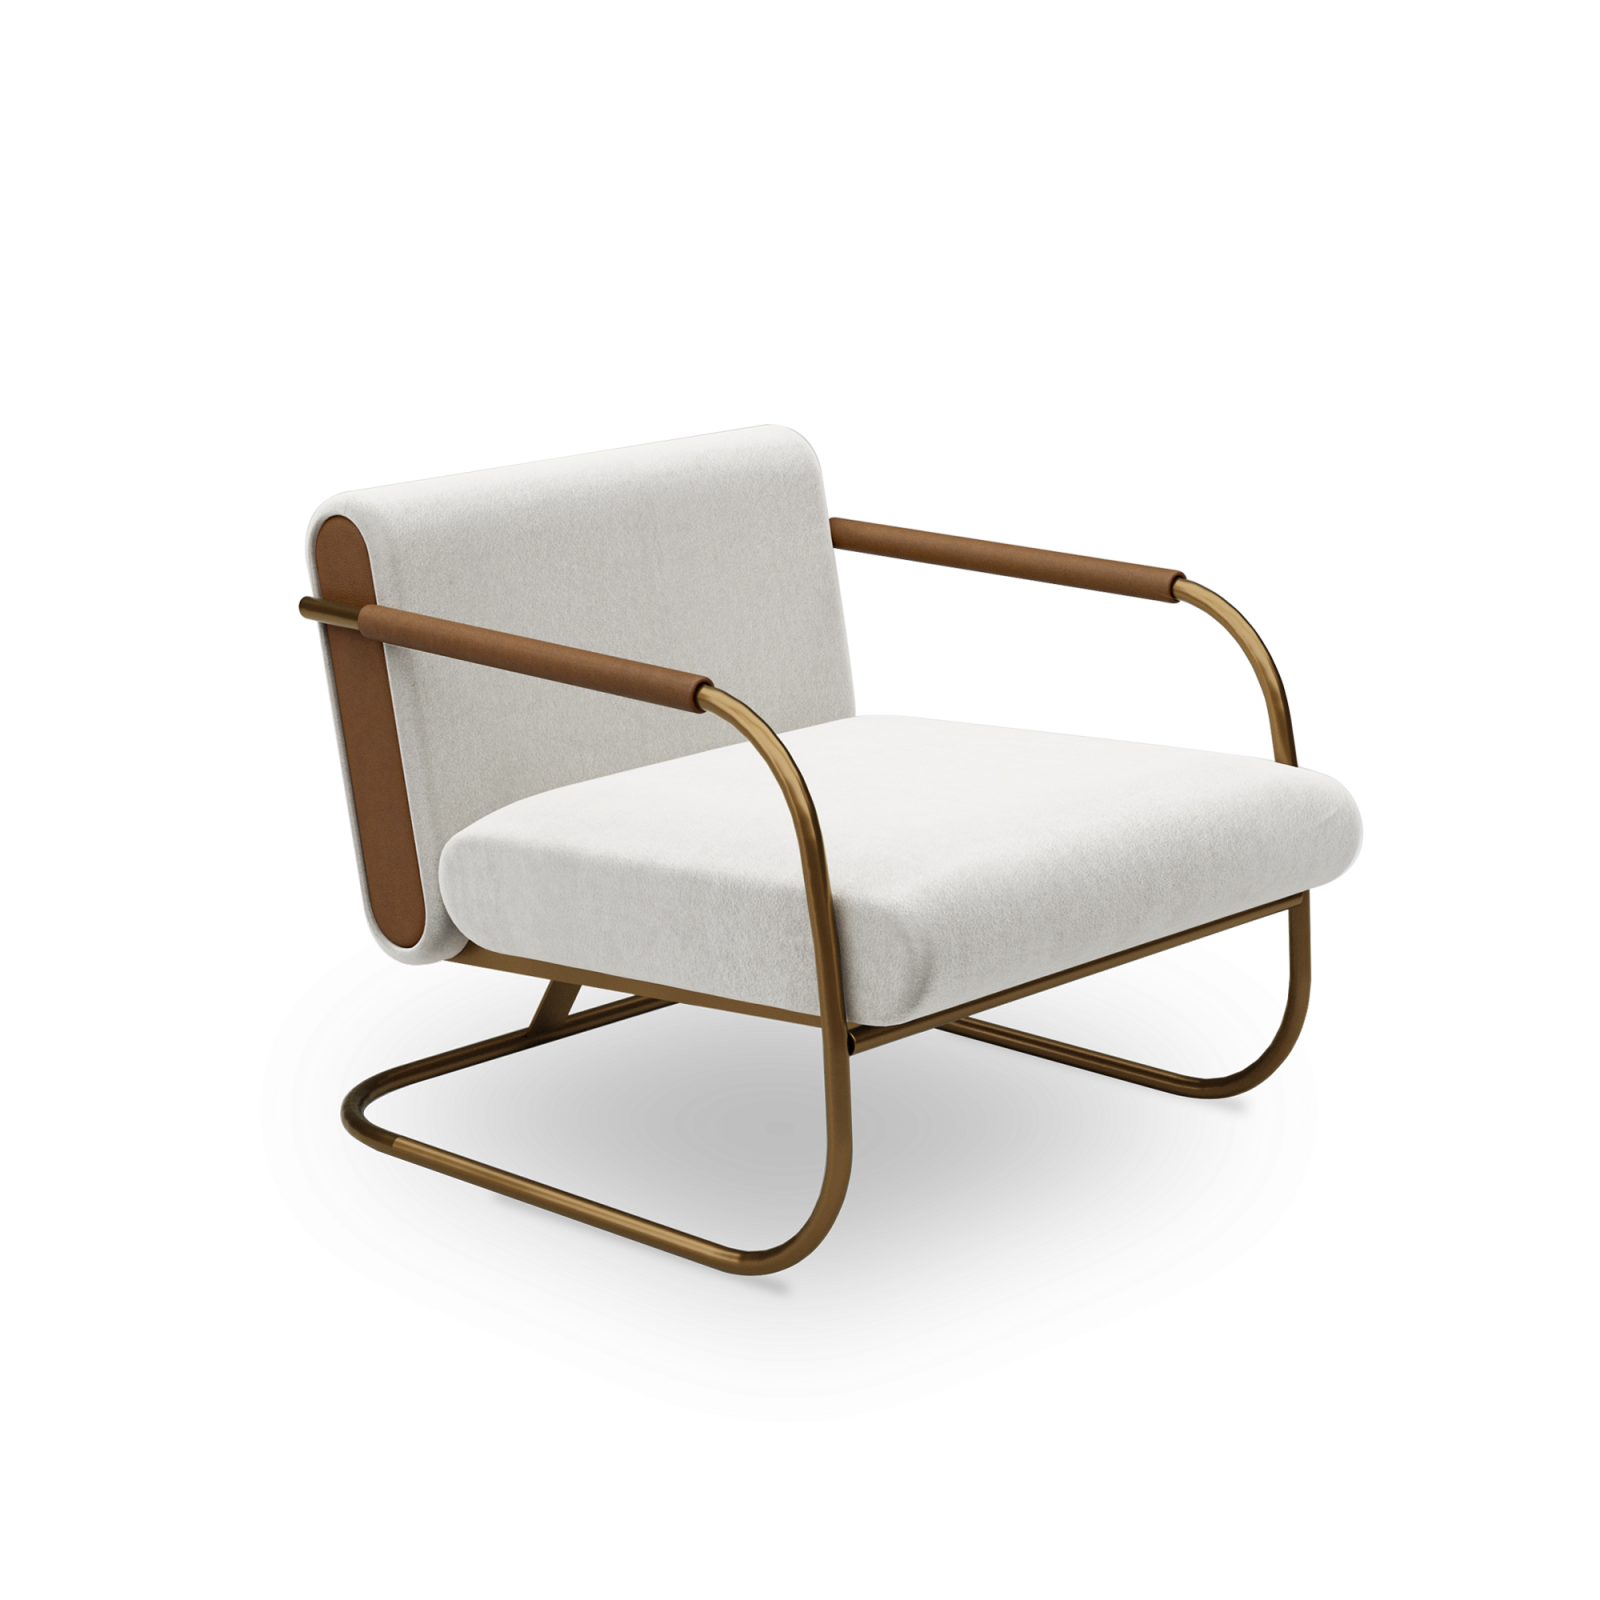 Suspence Open Armchair is the complement of the Suspence series.  with leather details and metal one-piece skeleton design used in the armrest part.